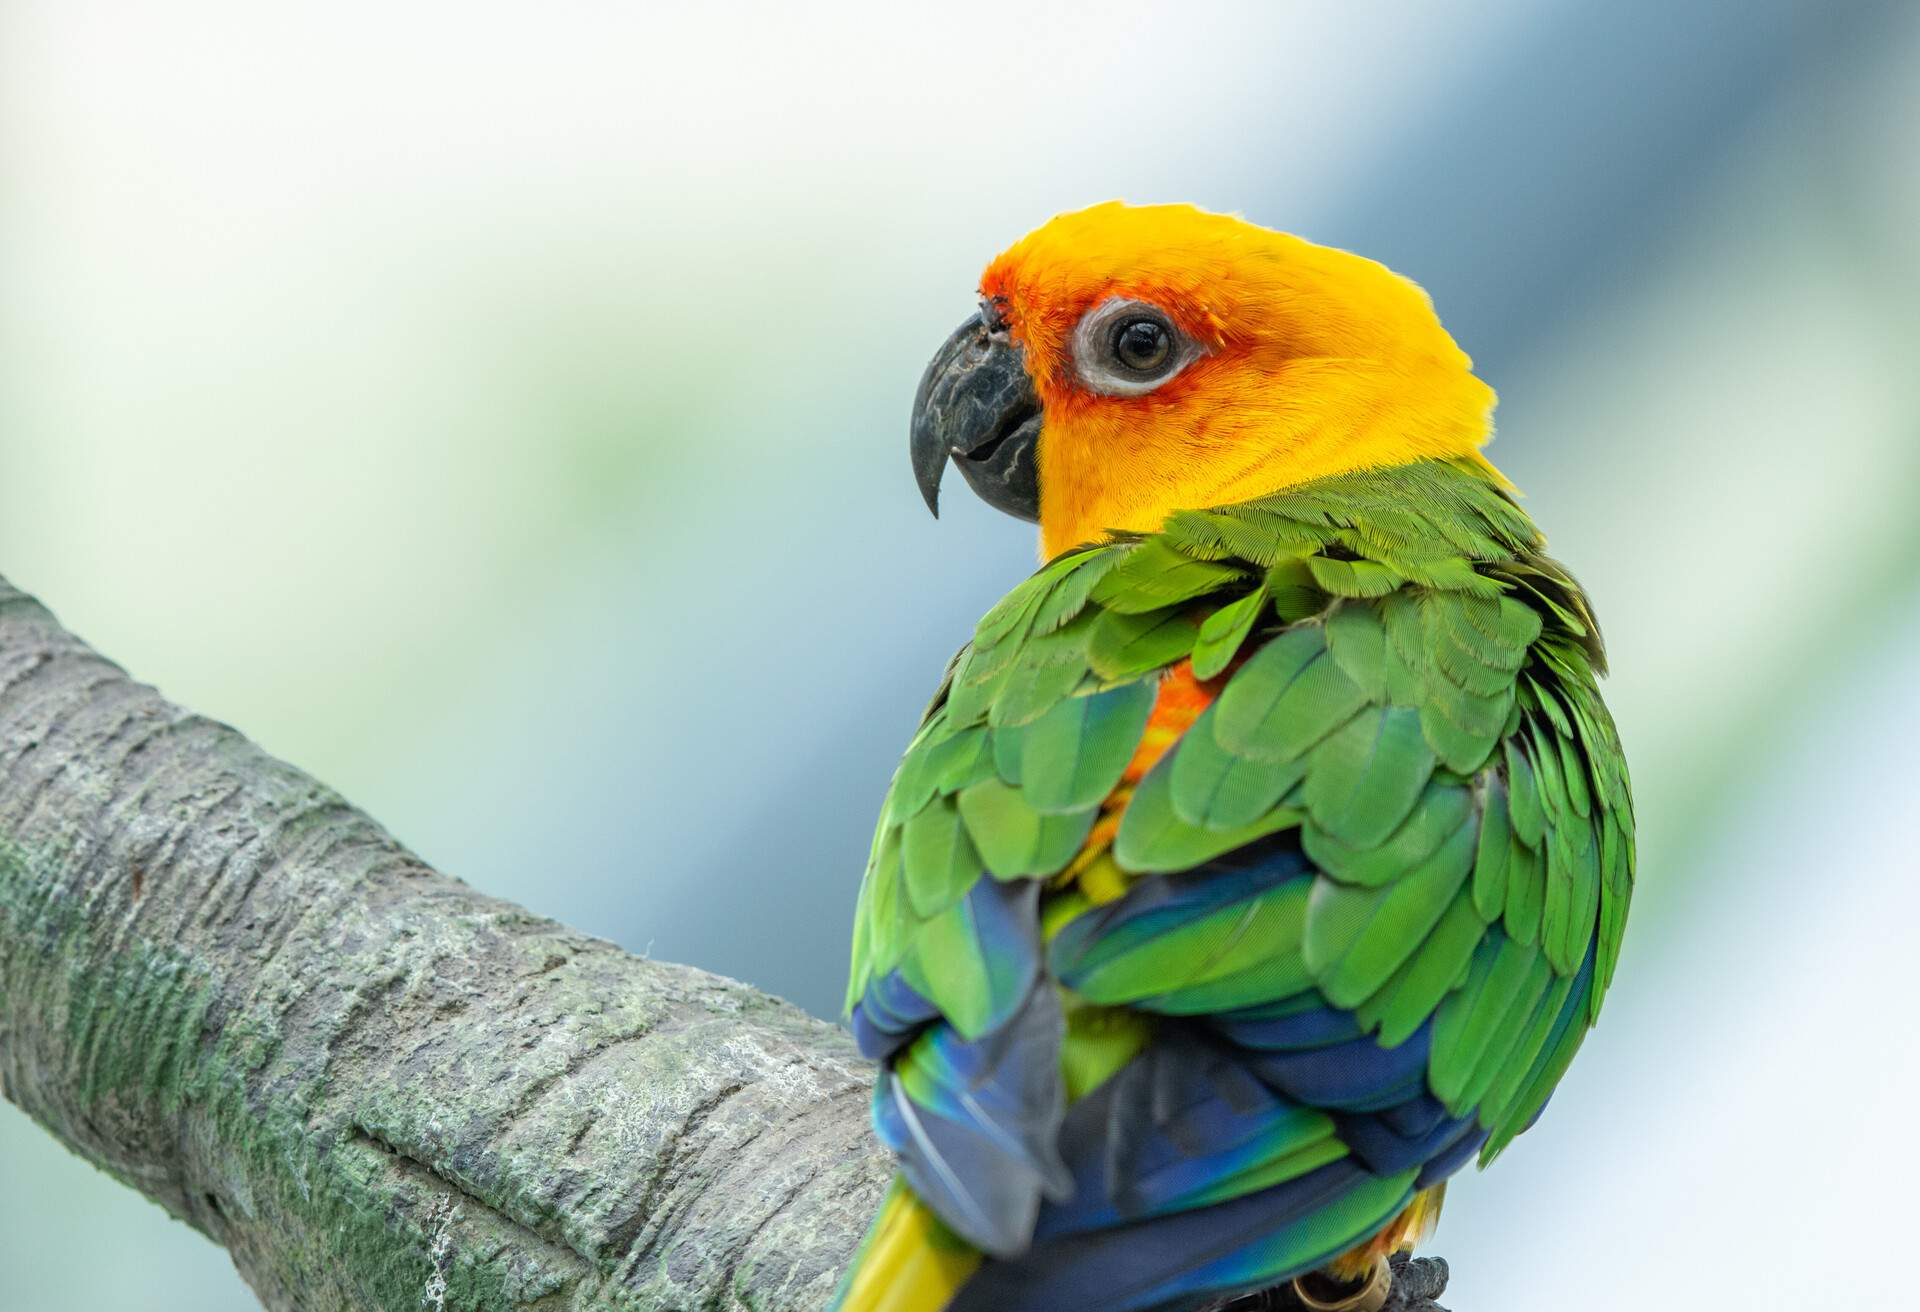 A Jenday Conure (Aratinga jandaya) perched in a tree, also known as jandaya parakeet is a small Neotropical bird found in northeastern Brazil.